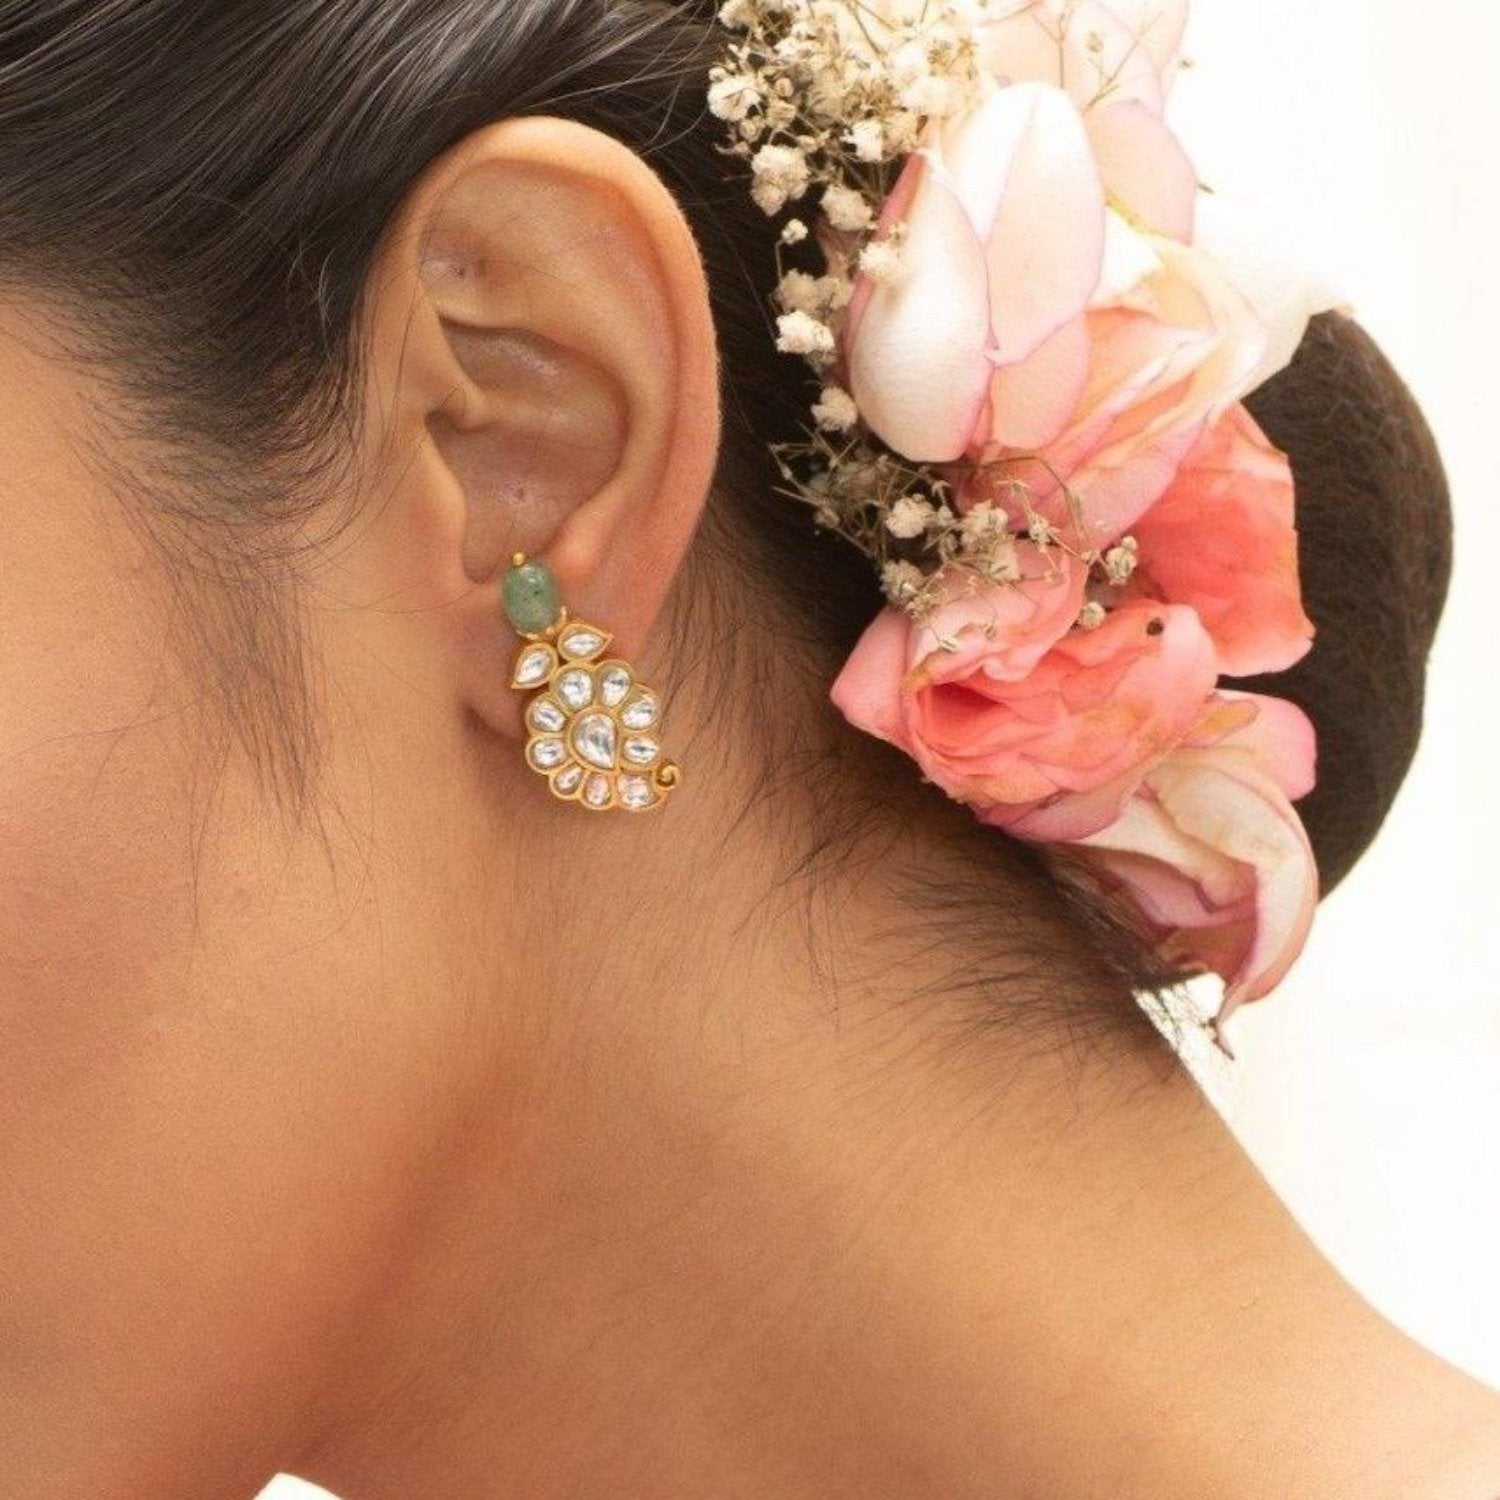 These Are the Earrings All The Girls Are Wearing - Jumble